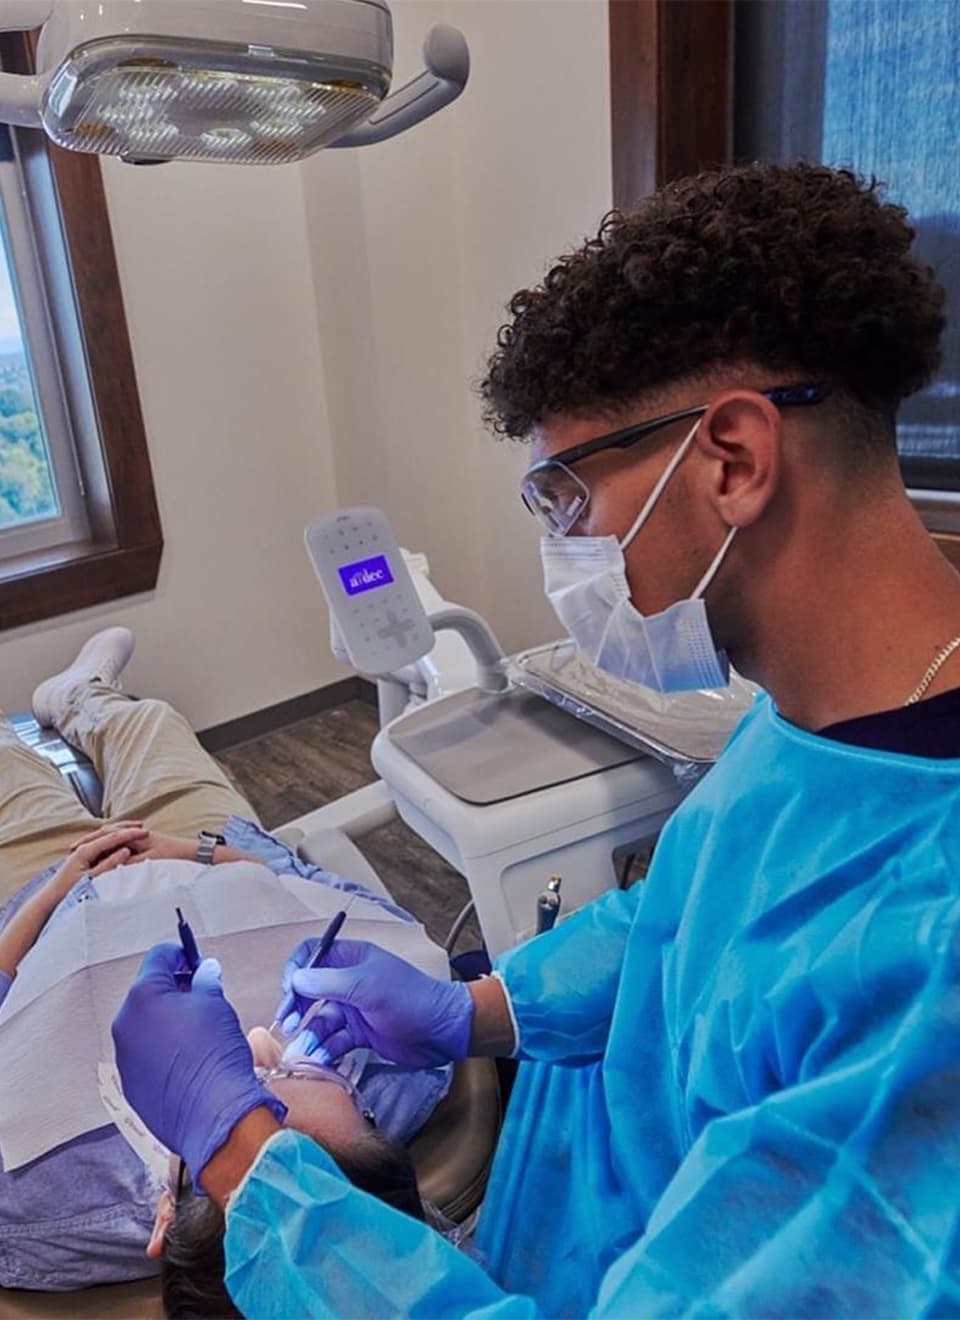 student learning dental techniques